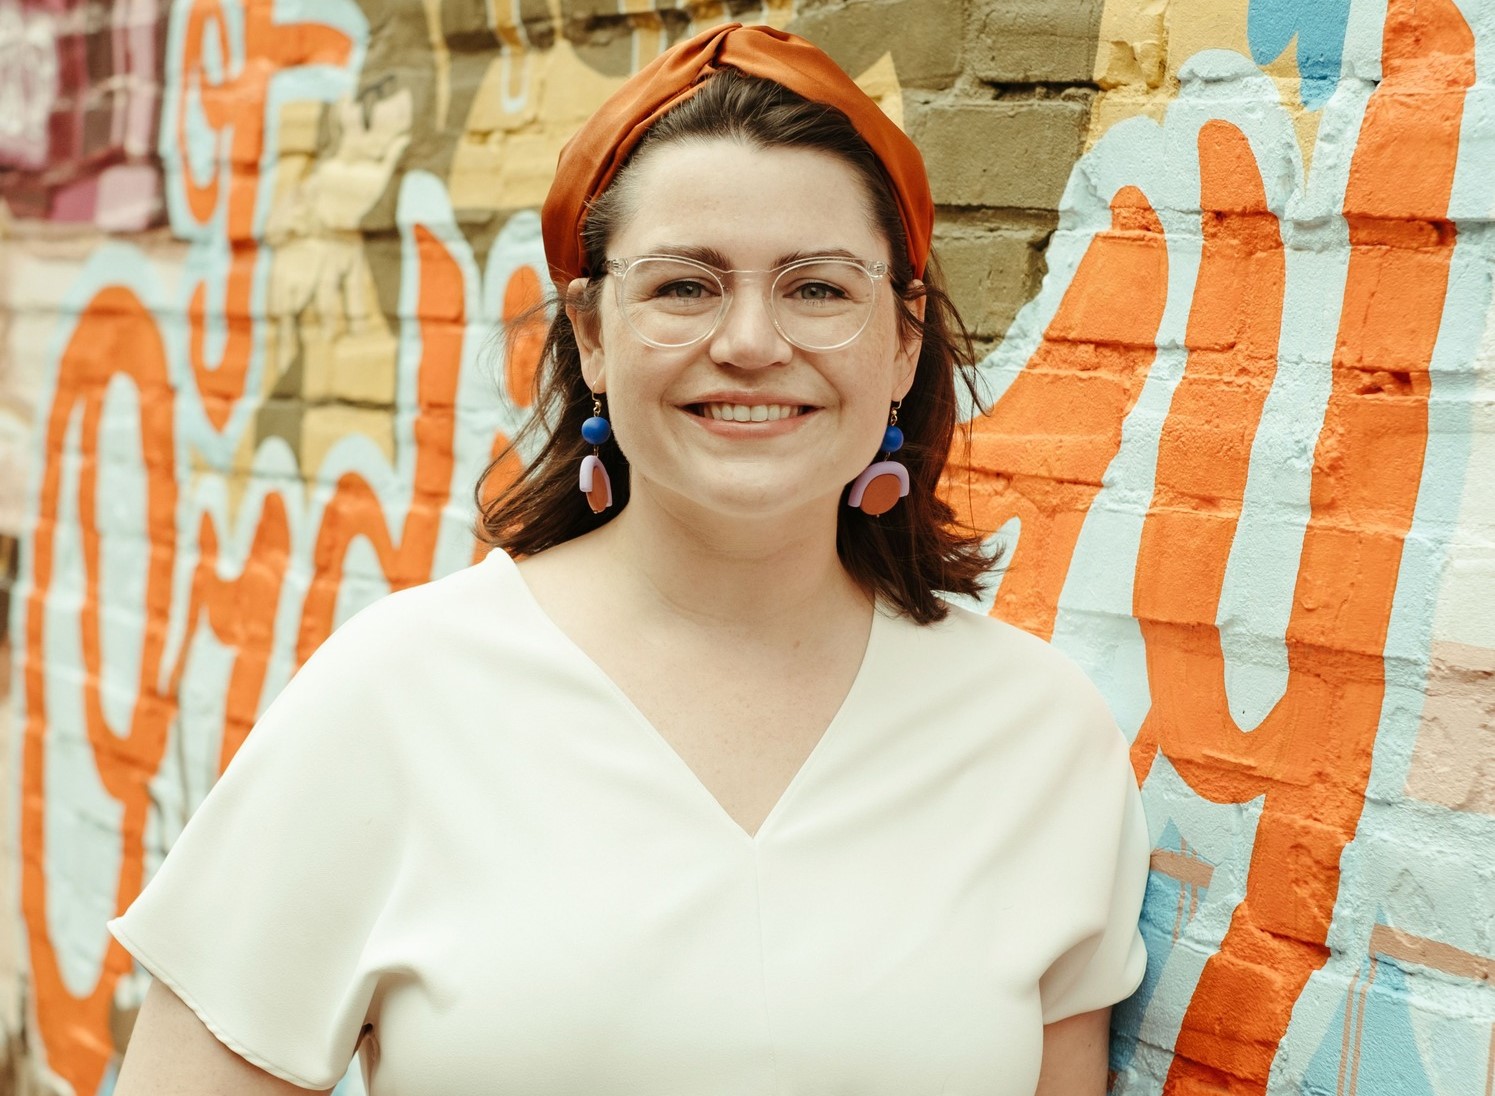 A white woman with short brown hair and an orange headband is leaning against a brick wall. The wall is painted with a colorful mural.